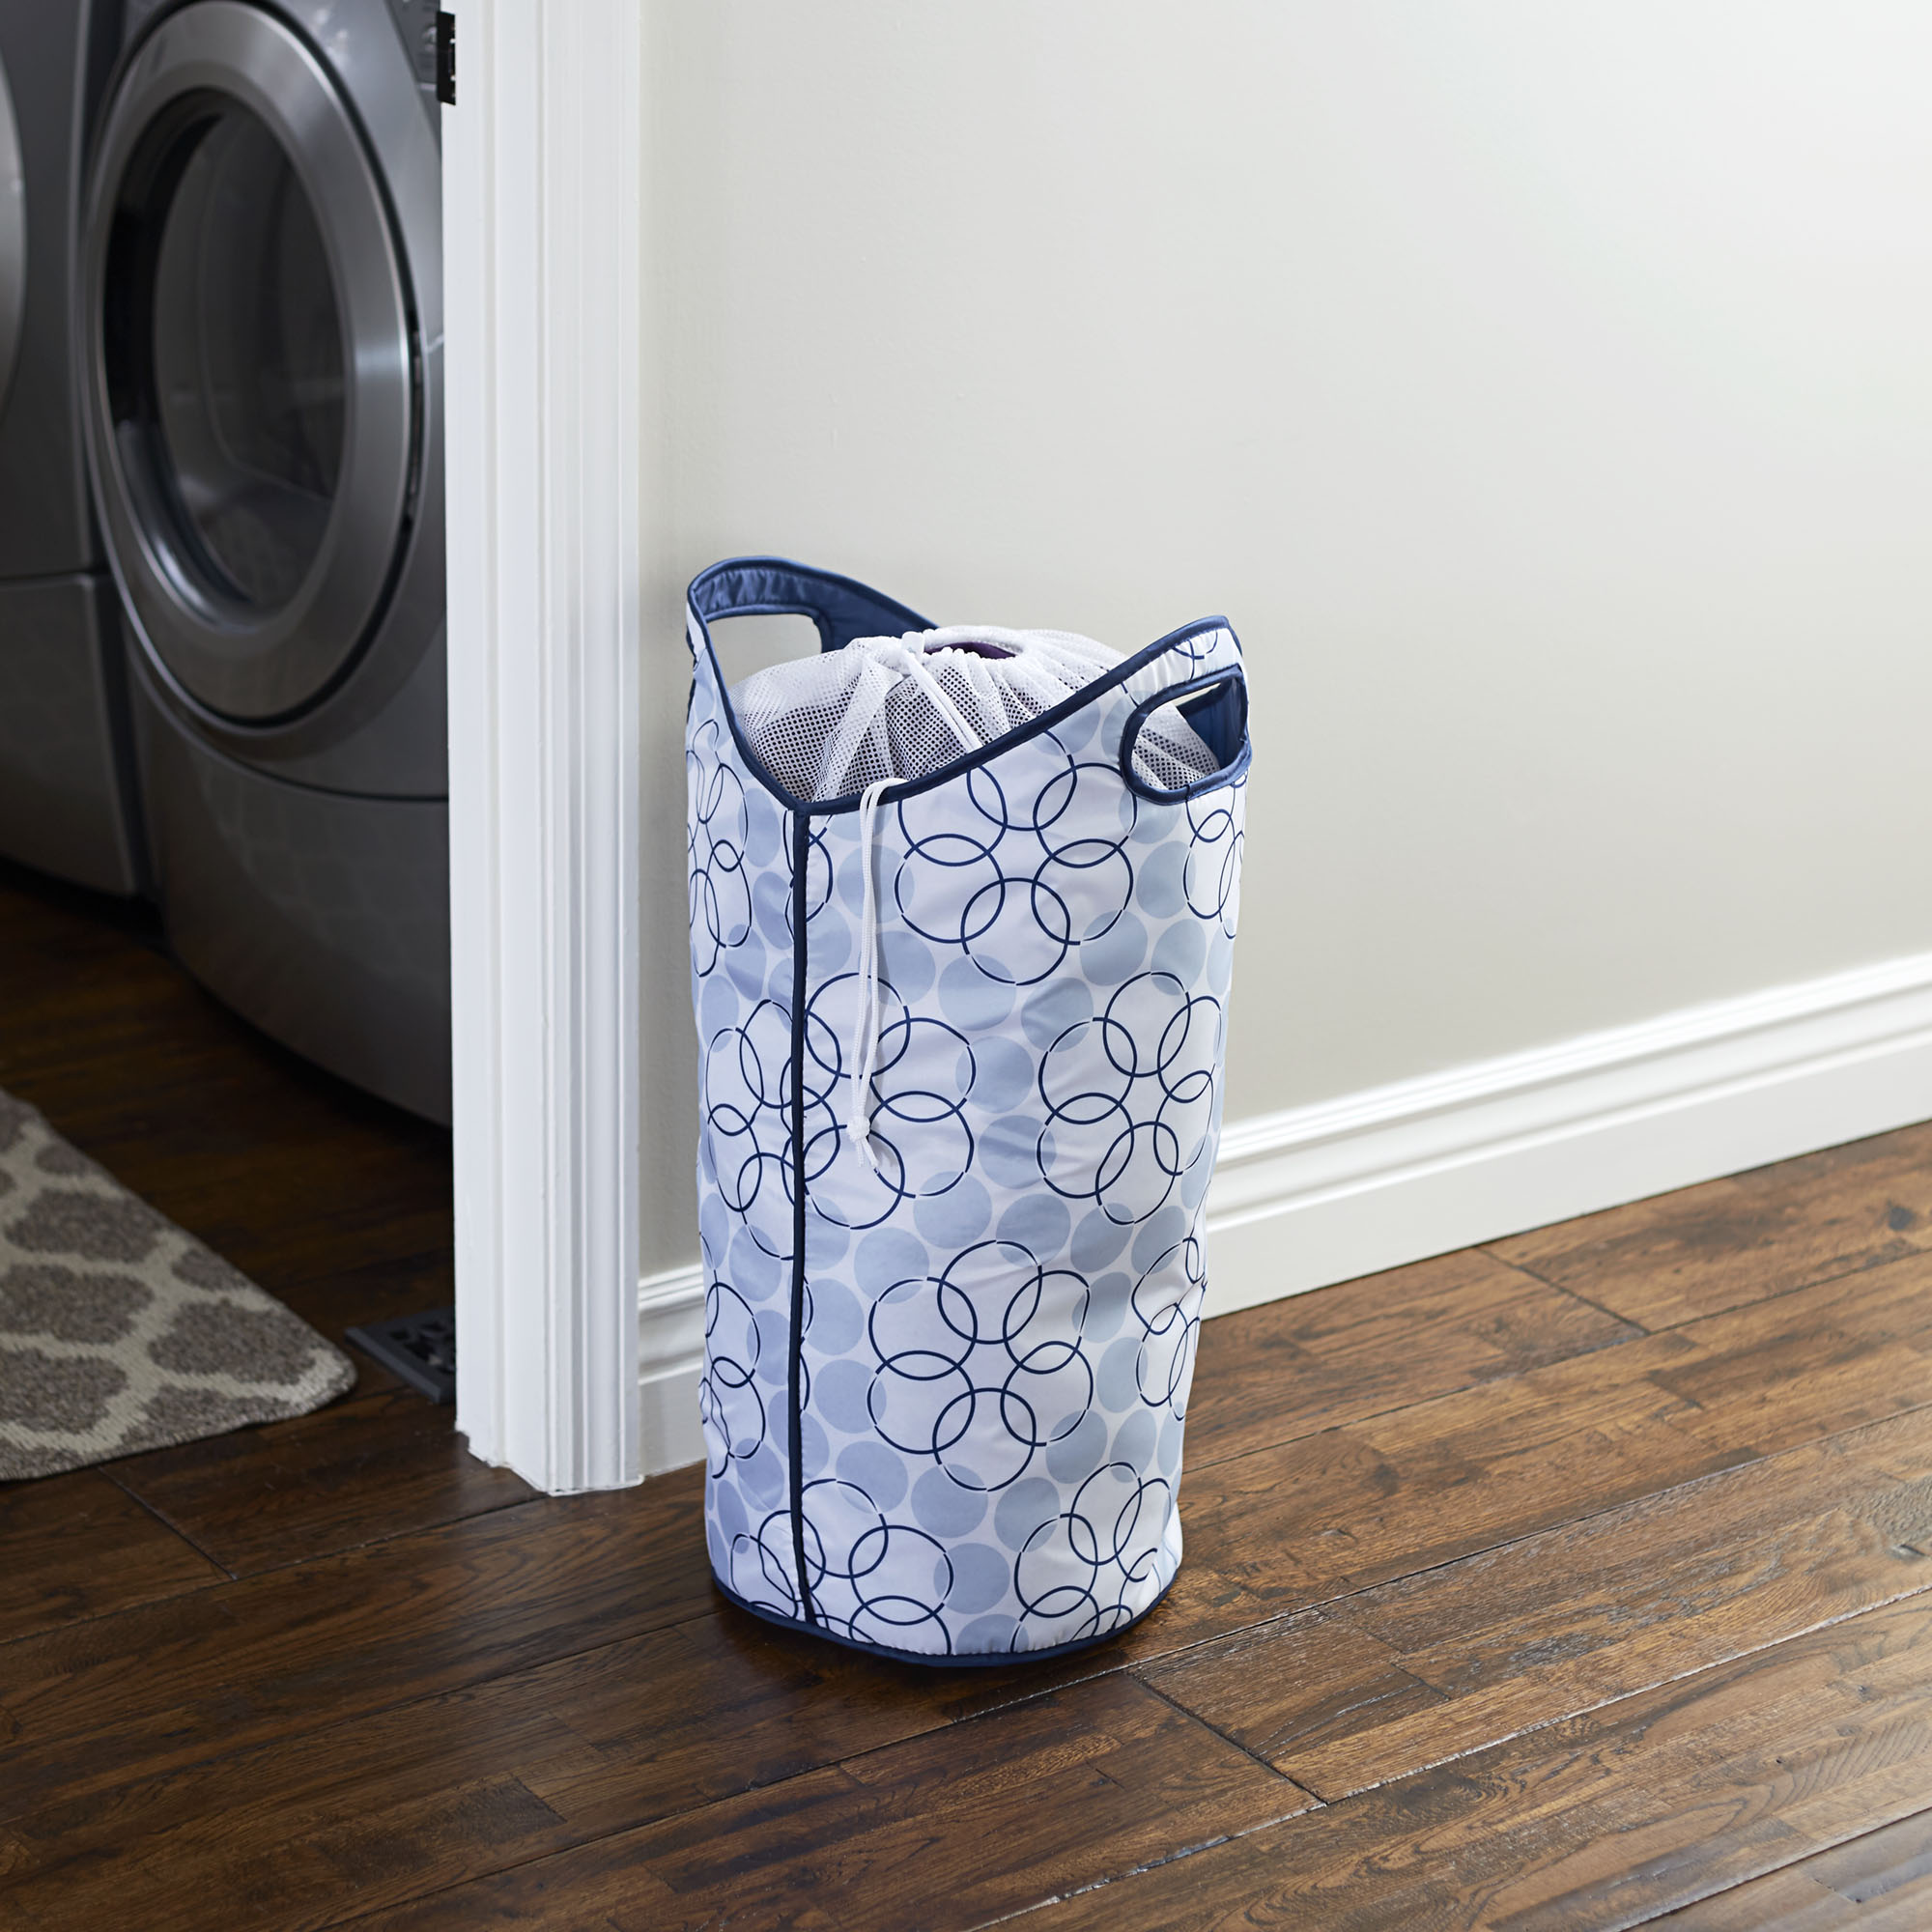 Household Essentials Patterned Laundry Hamper Tote - image 3 of 4